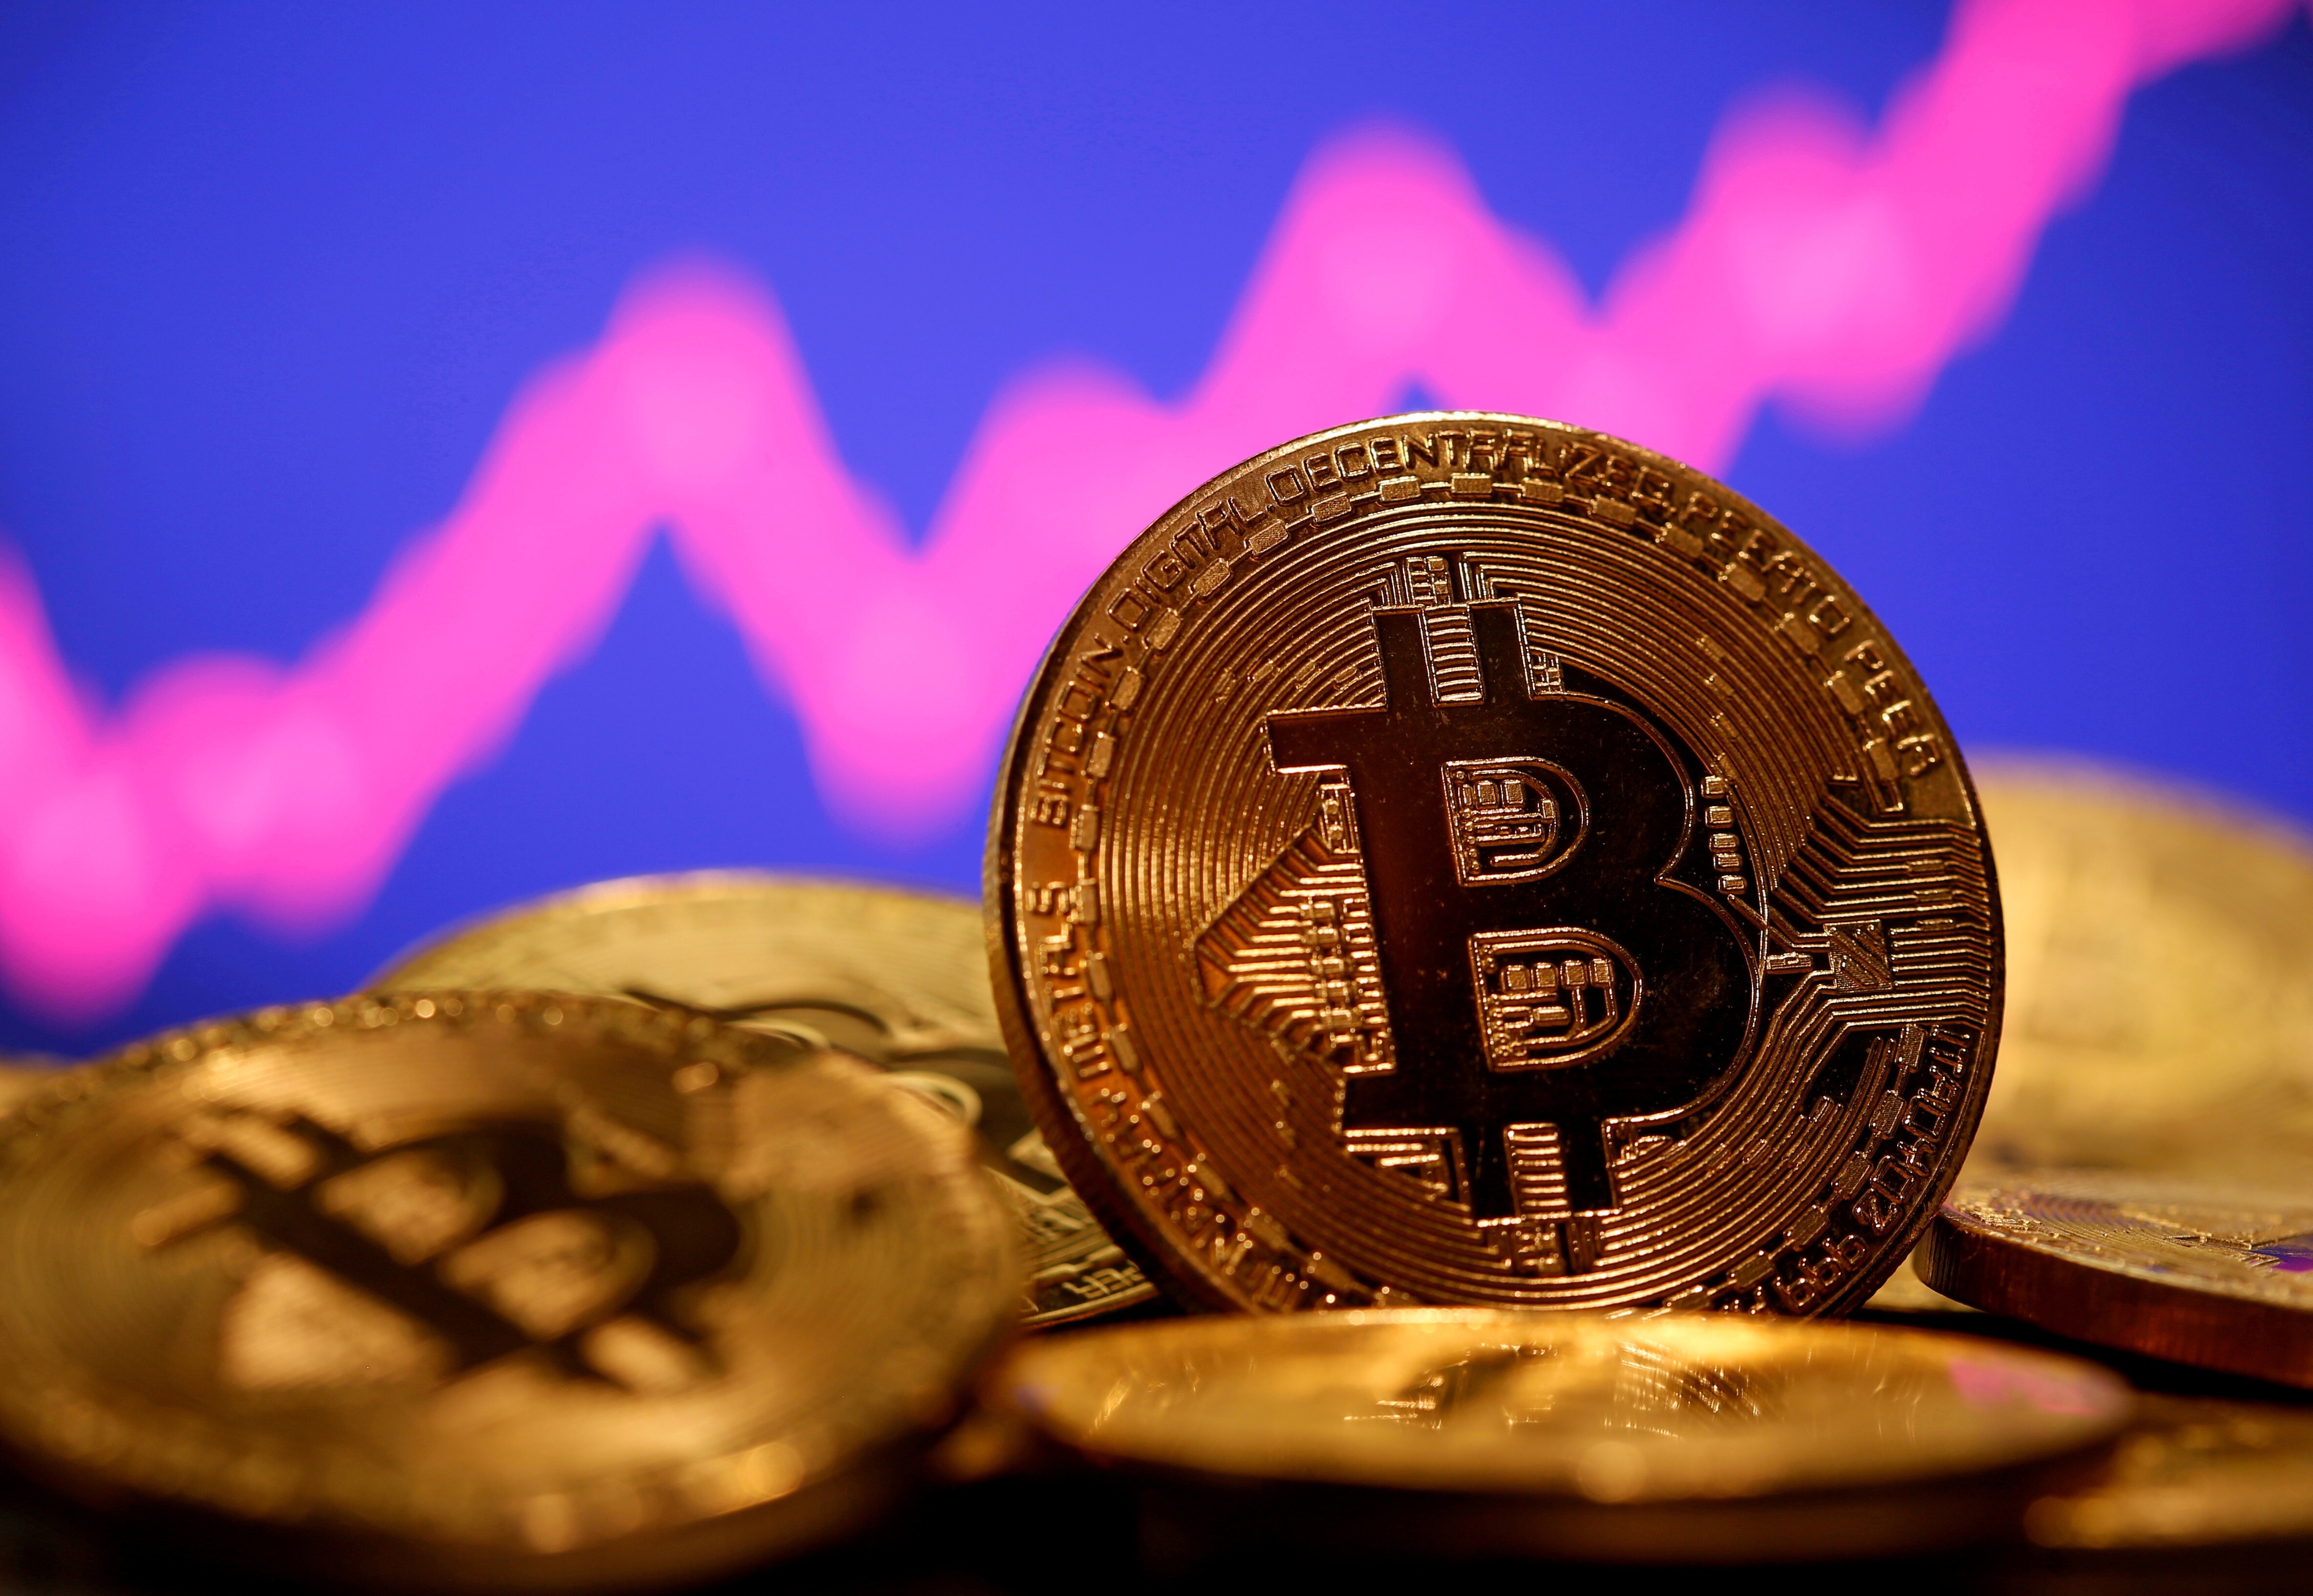 The price of bitcoin has soared to over US$50,000. Photo: Reuters